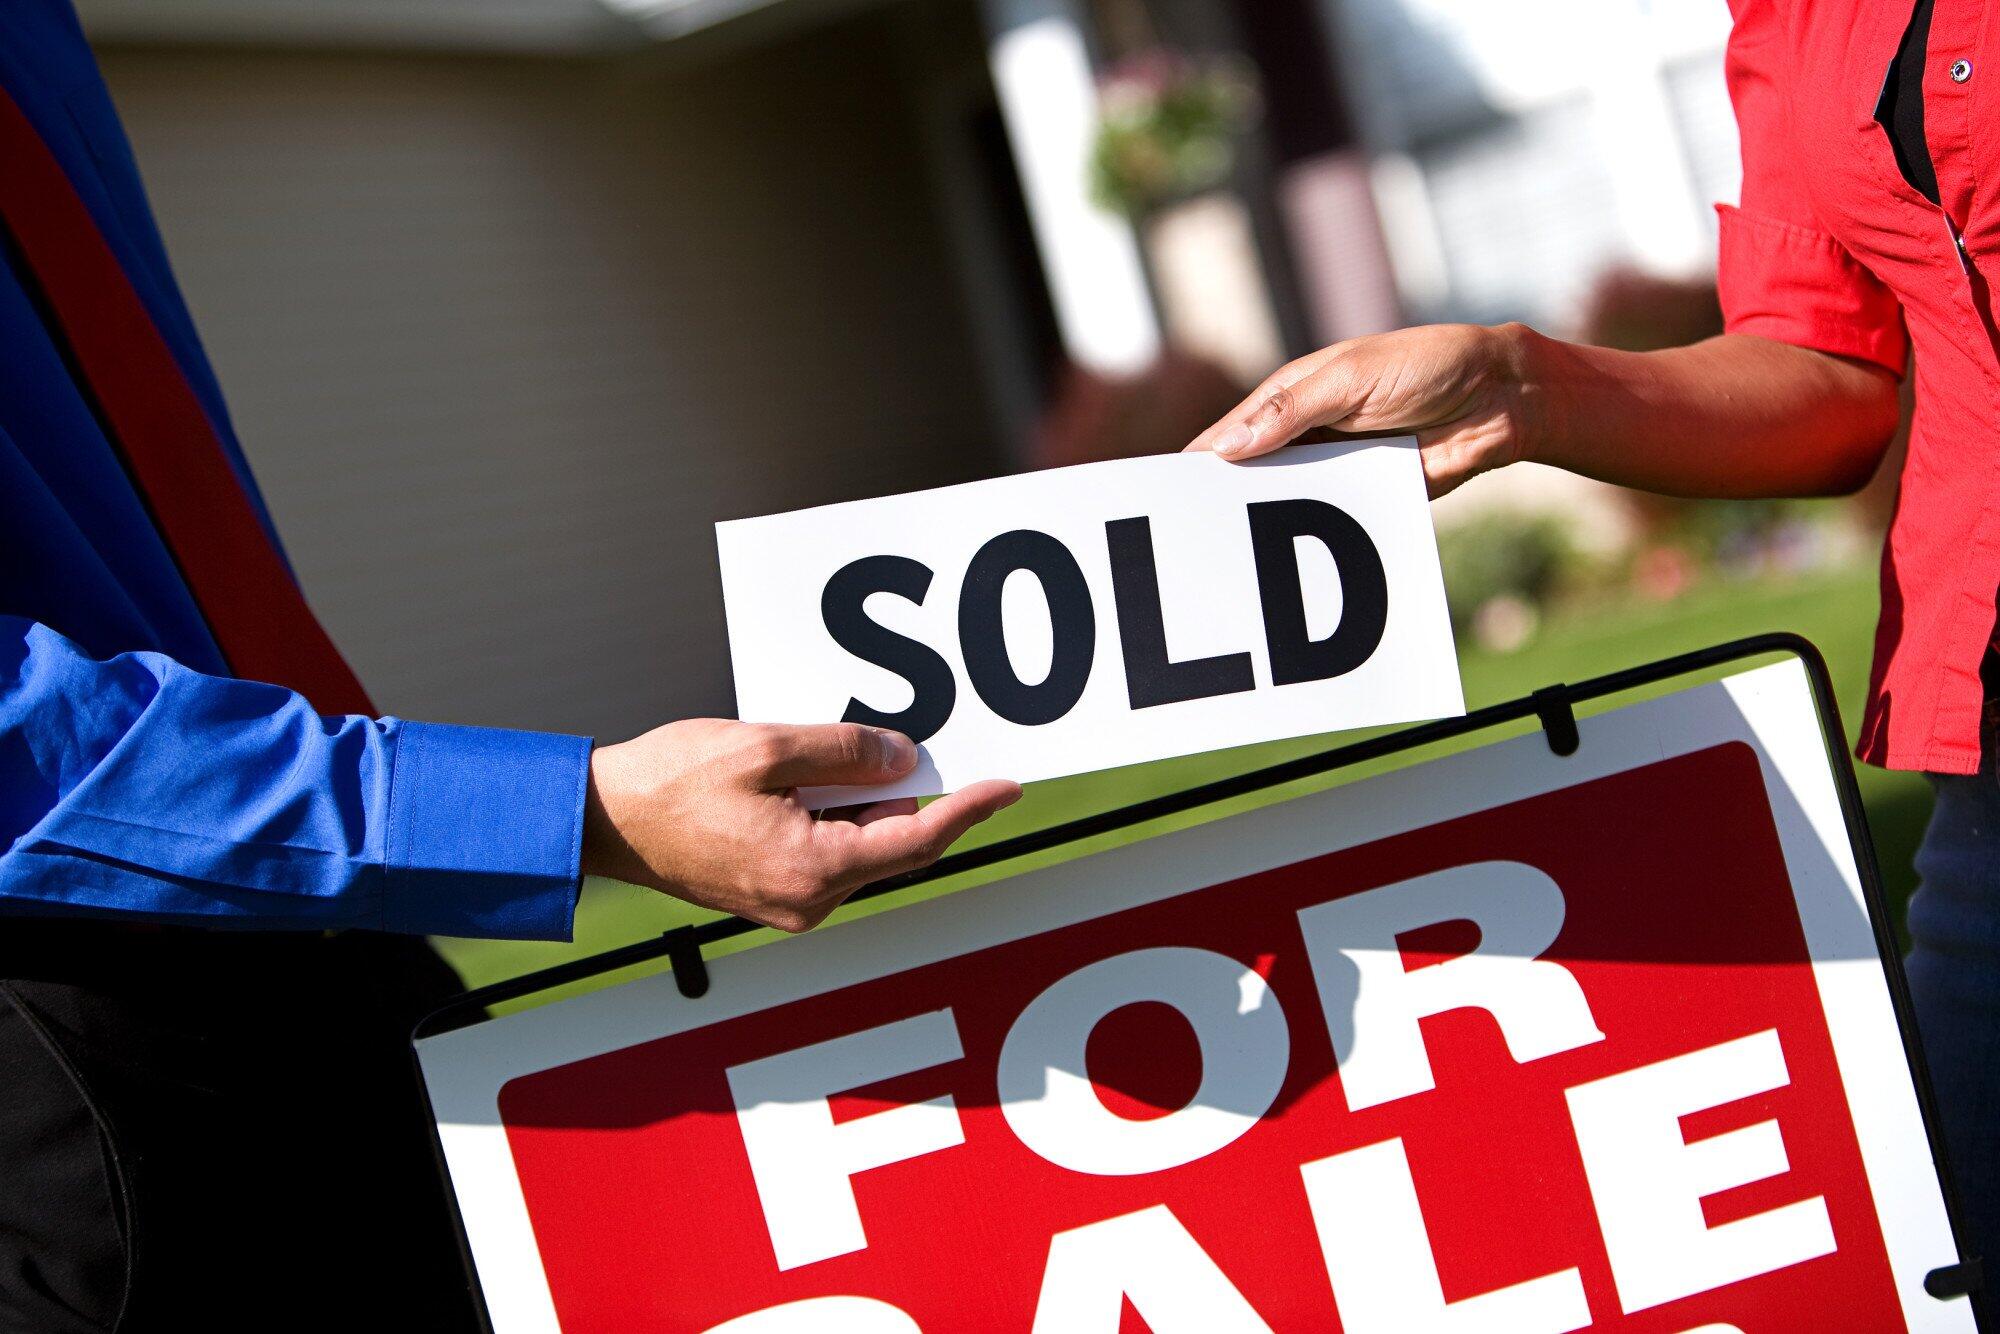 How Much Do You Lose Selling a House As-Is?